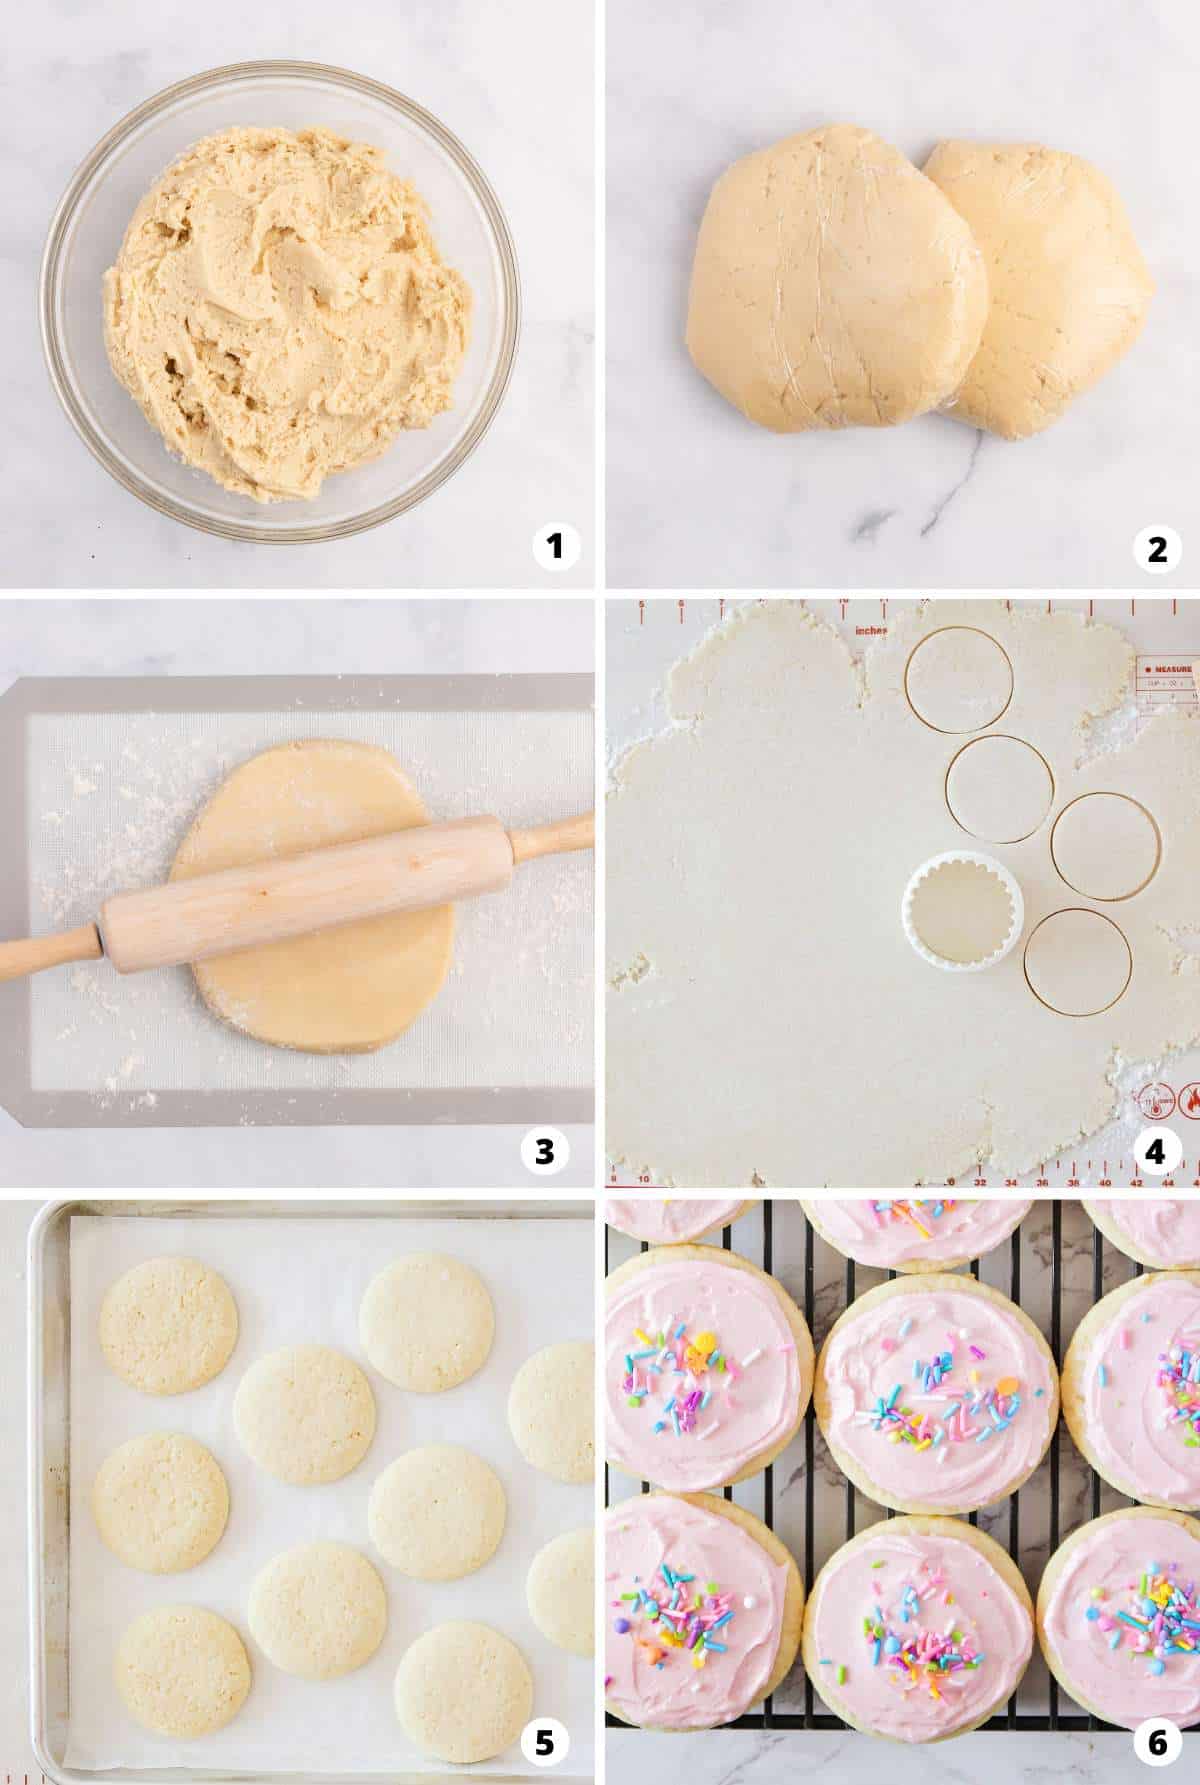 Showing how to make sugar cookies in a 6 step collage.